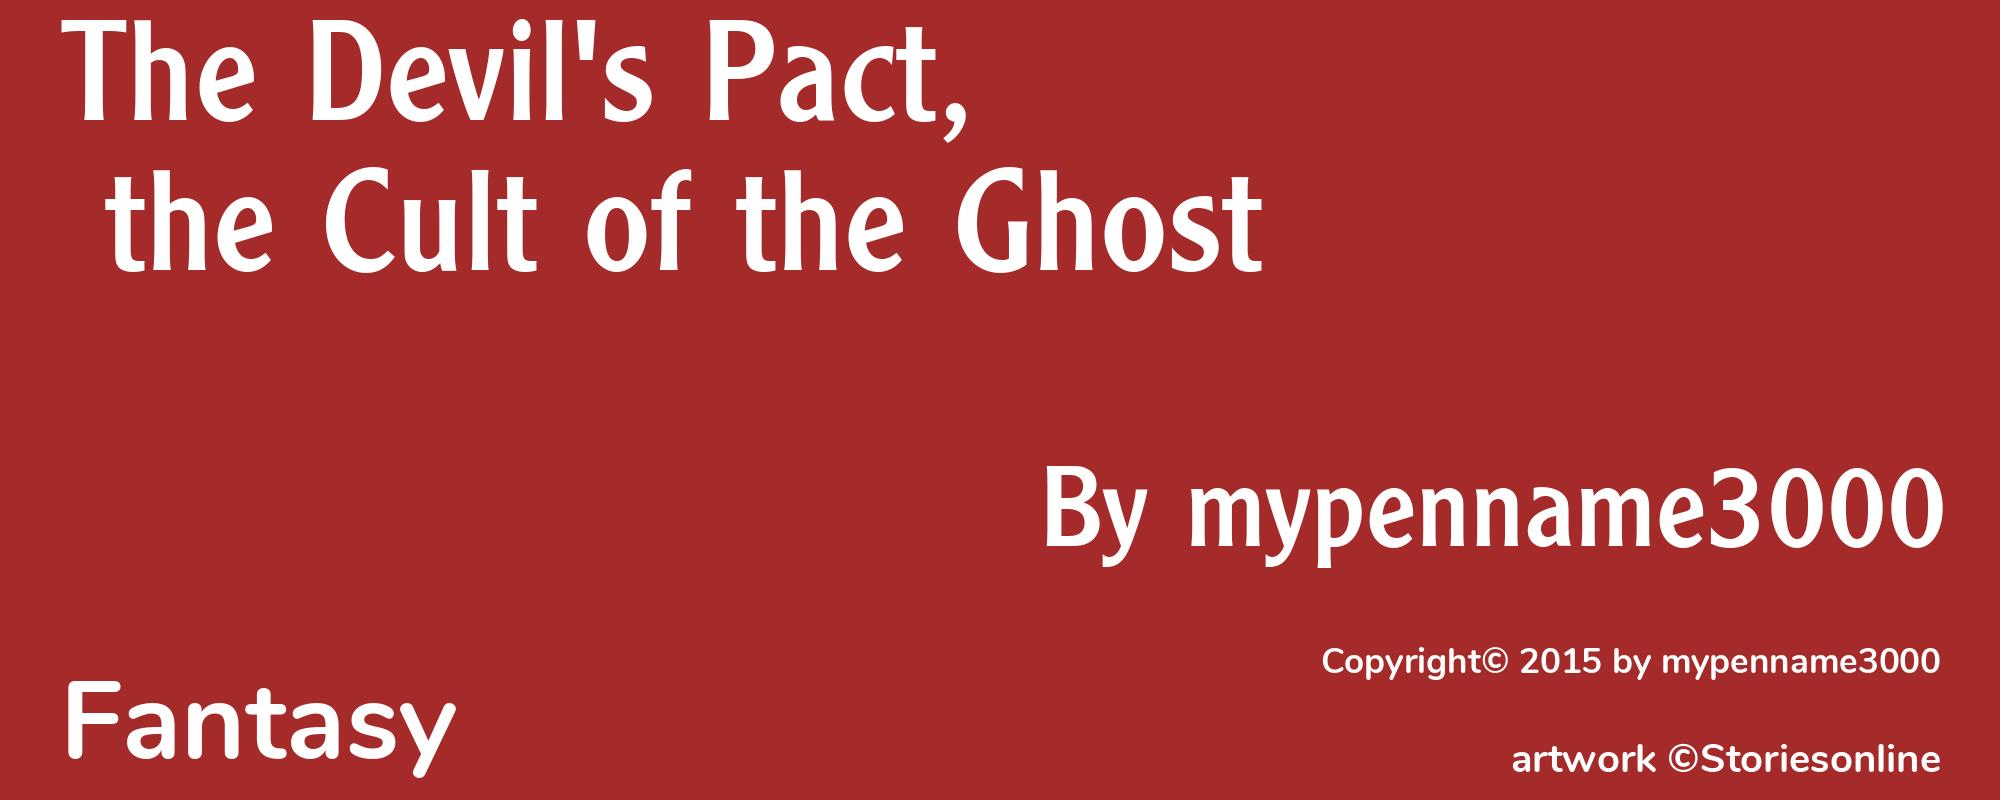 The Devil's Pact, the Cult of the Ghost - Cover